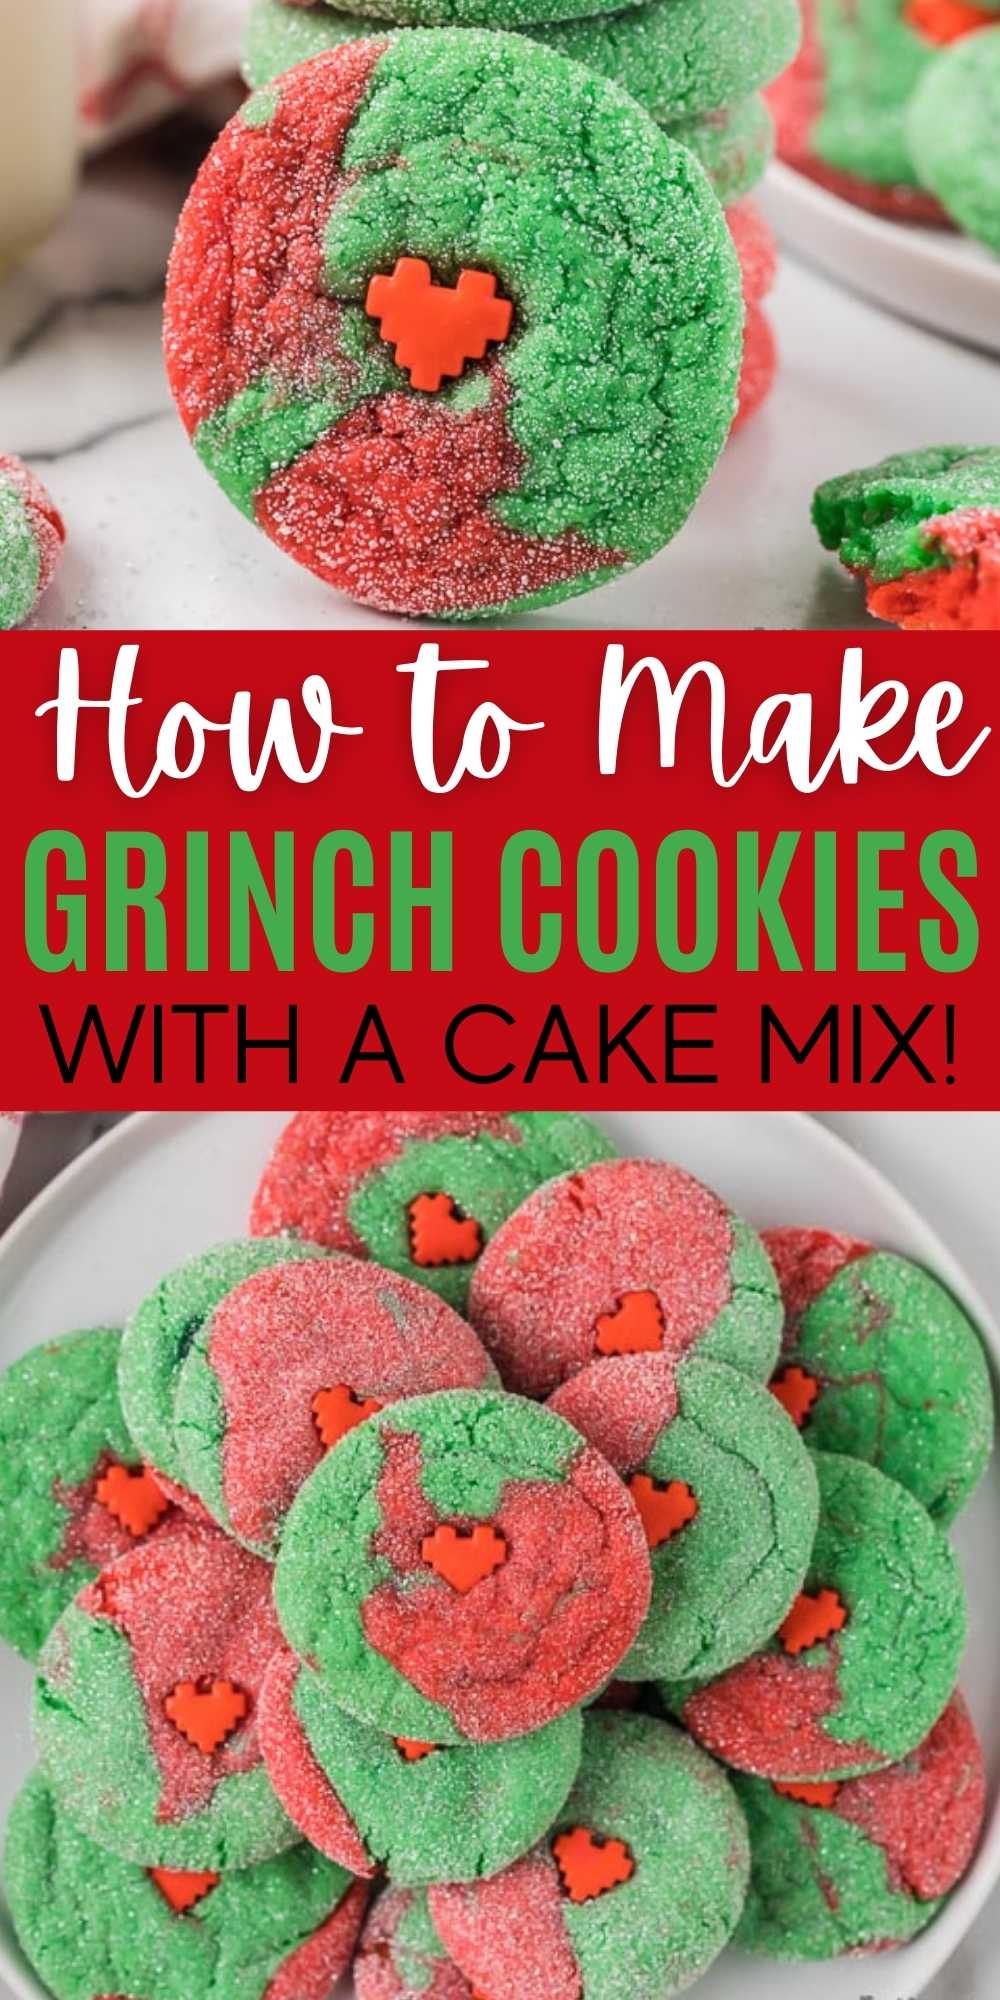 Learn how to make fun and easy Grinch Cookies Recipe. Grinch Cookies cake mix recipe is easy to make and delicious too.  These simple grinch cookies are simple to make and festive for Christmas!  #eatingonadime #cookierecipes #cakemixcookies #holidaydesserts #christmasdesserts 
